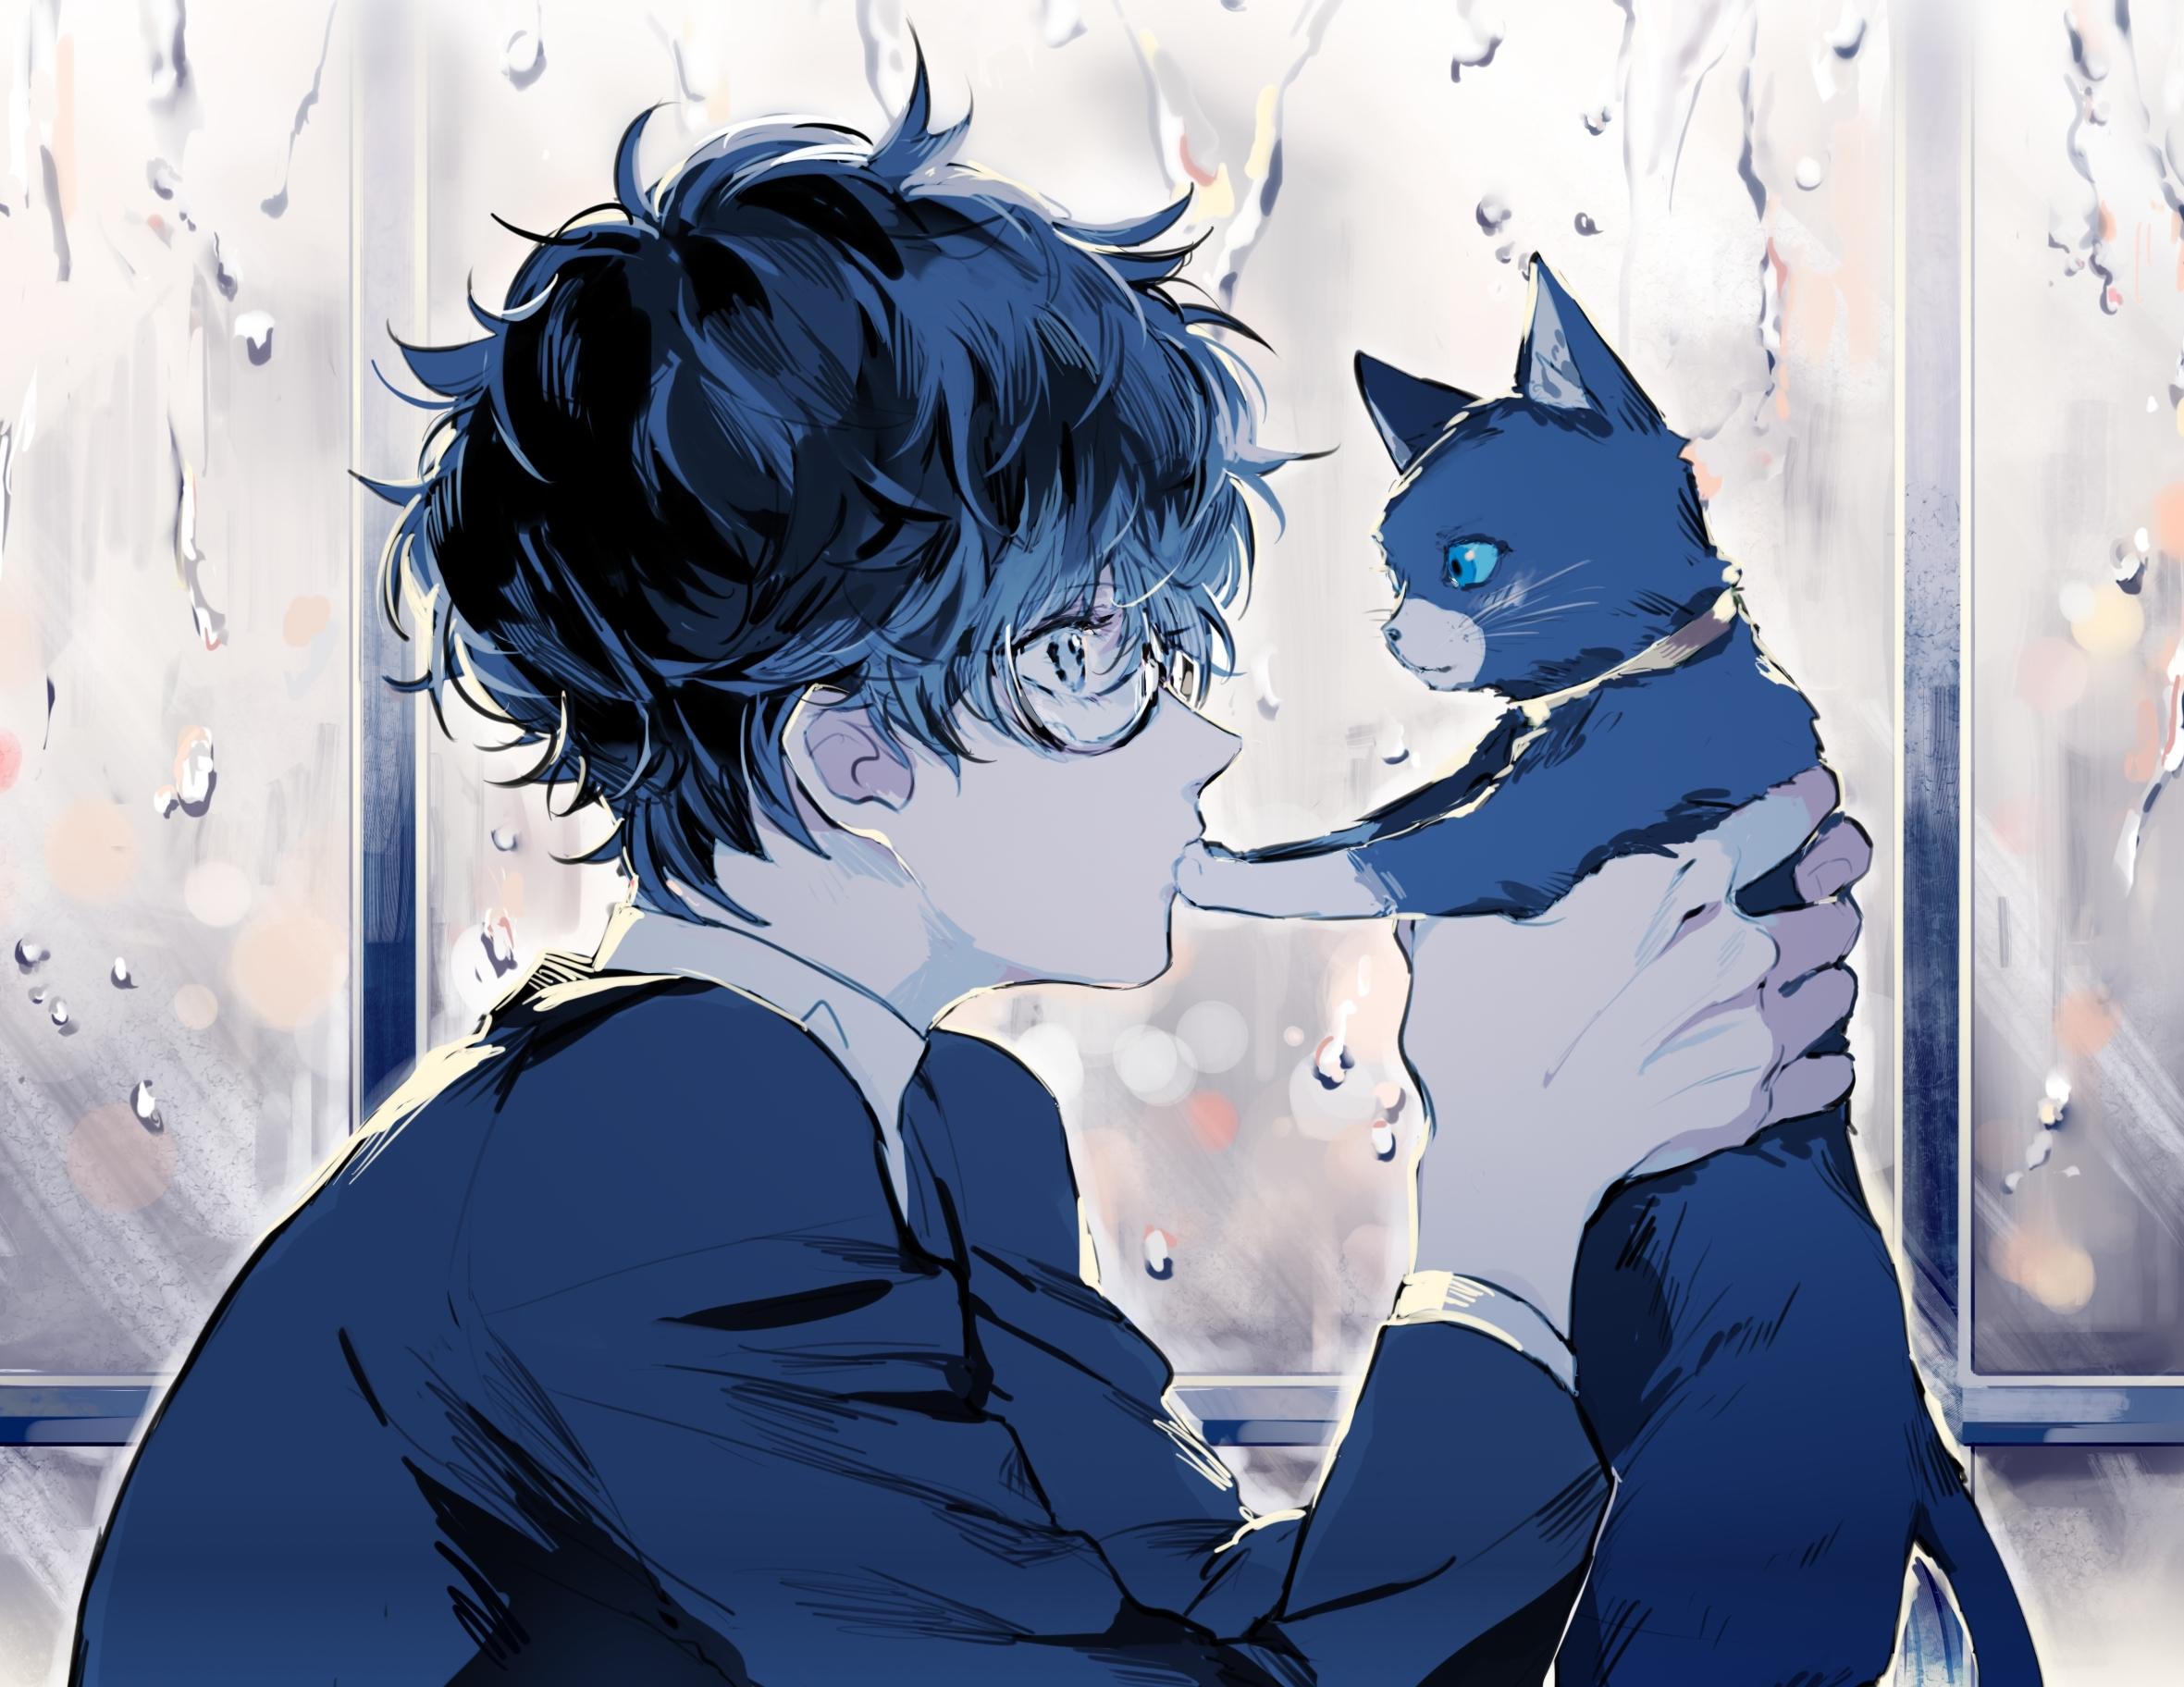 An Anime Boy With Glasses Background, Cool Pfp Pictures, Cool Powerpoint,  Cool Background Image And Wallpaper for Free Download